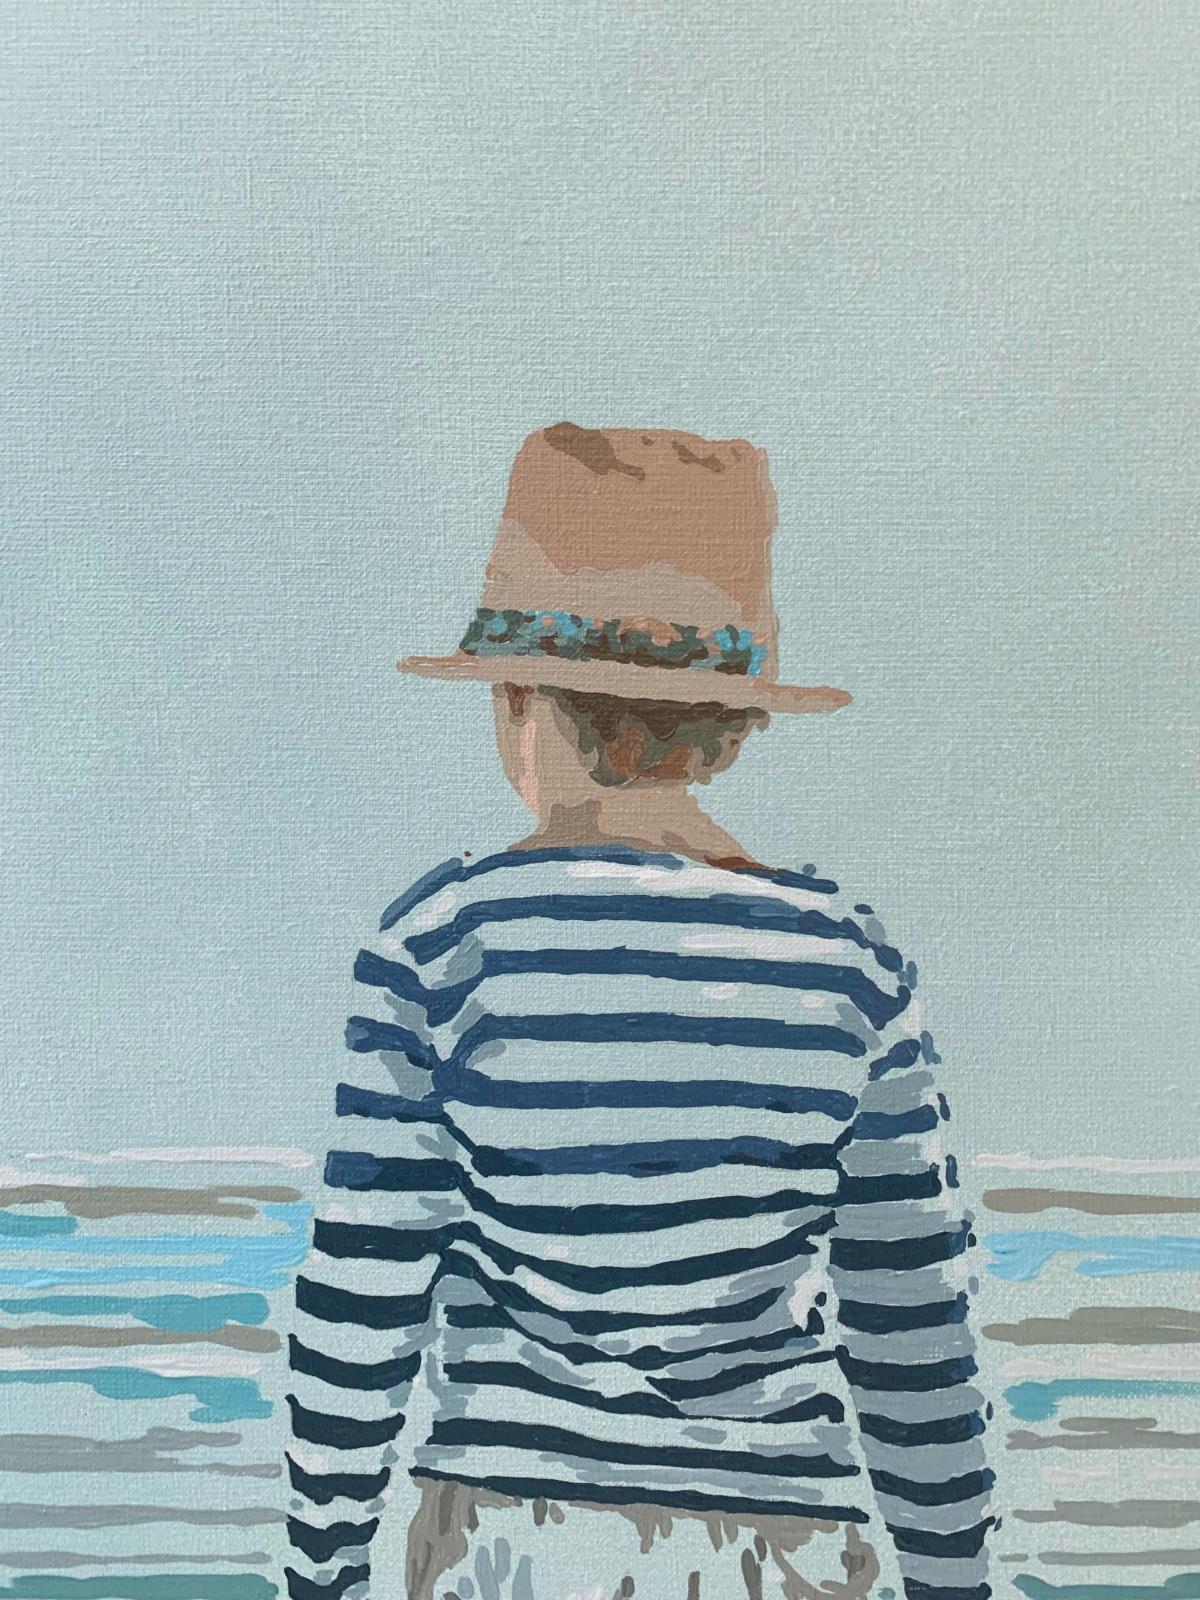 Contemporary figurative acrylic on canvas painting by Polish artist Joanna Woyda. Painting is in minimalistic, pop art style. The artwork depicts a boy seen from behind, gazing at the sea. He is waering striped shirt and a hat Color of the